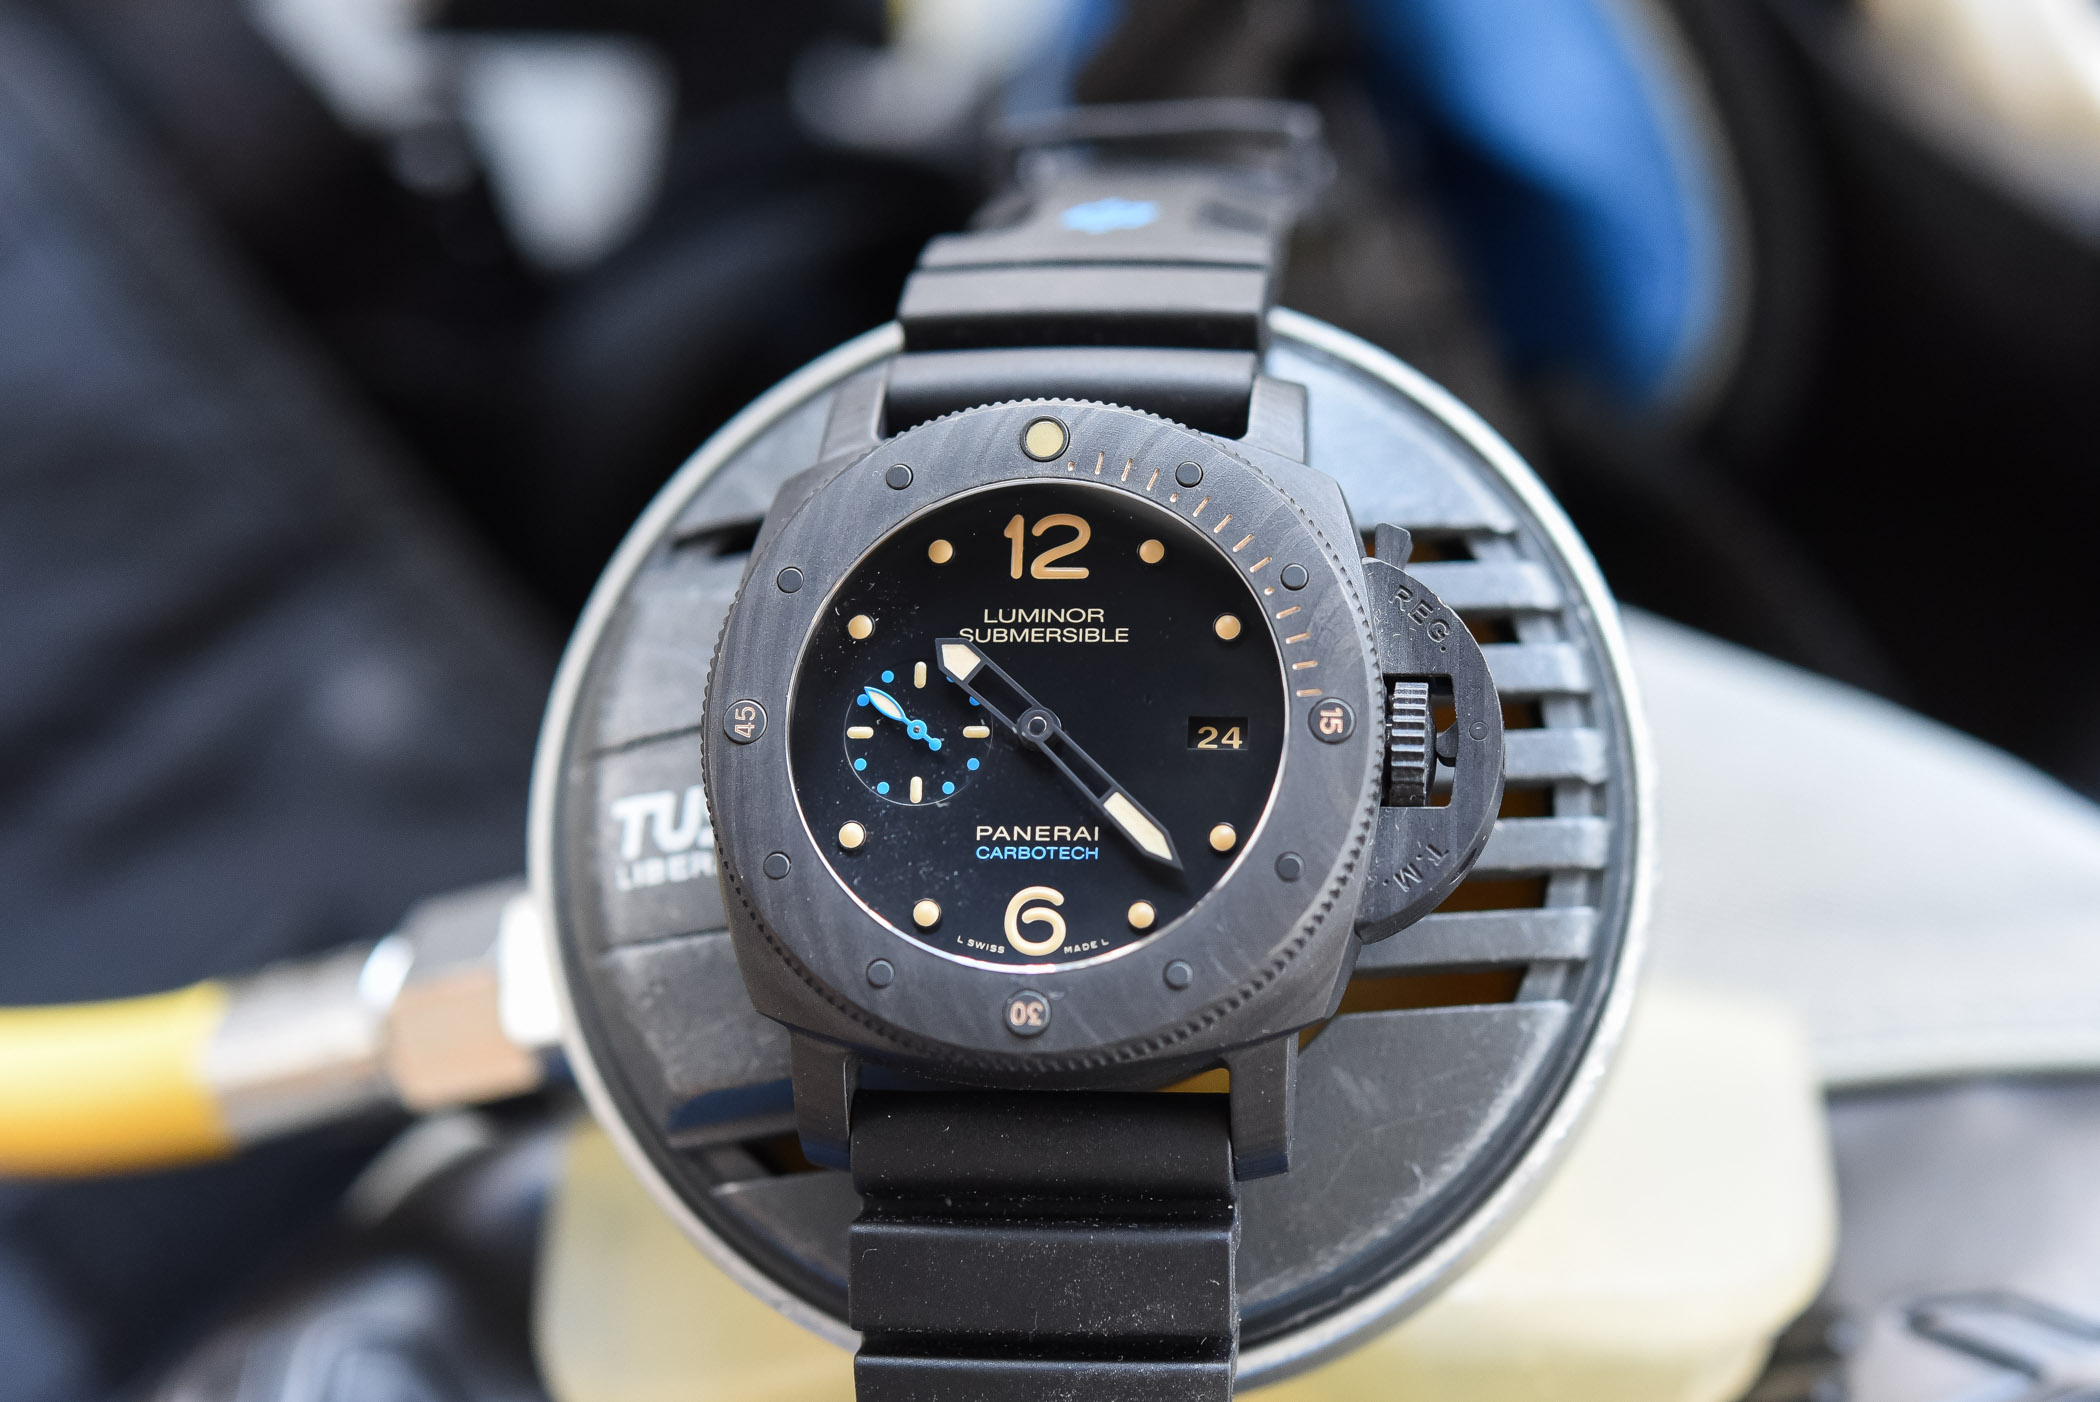 Panerai Luminor Submersible 1950 Carbotech 3 Days Automatic 47mm PAM00616